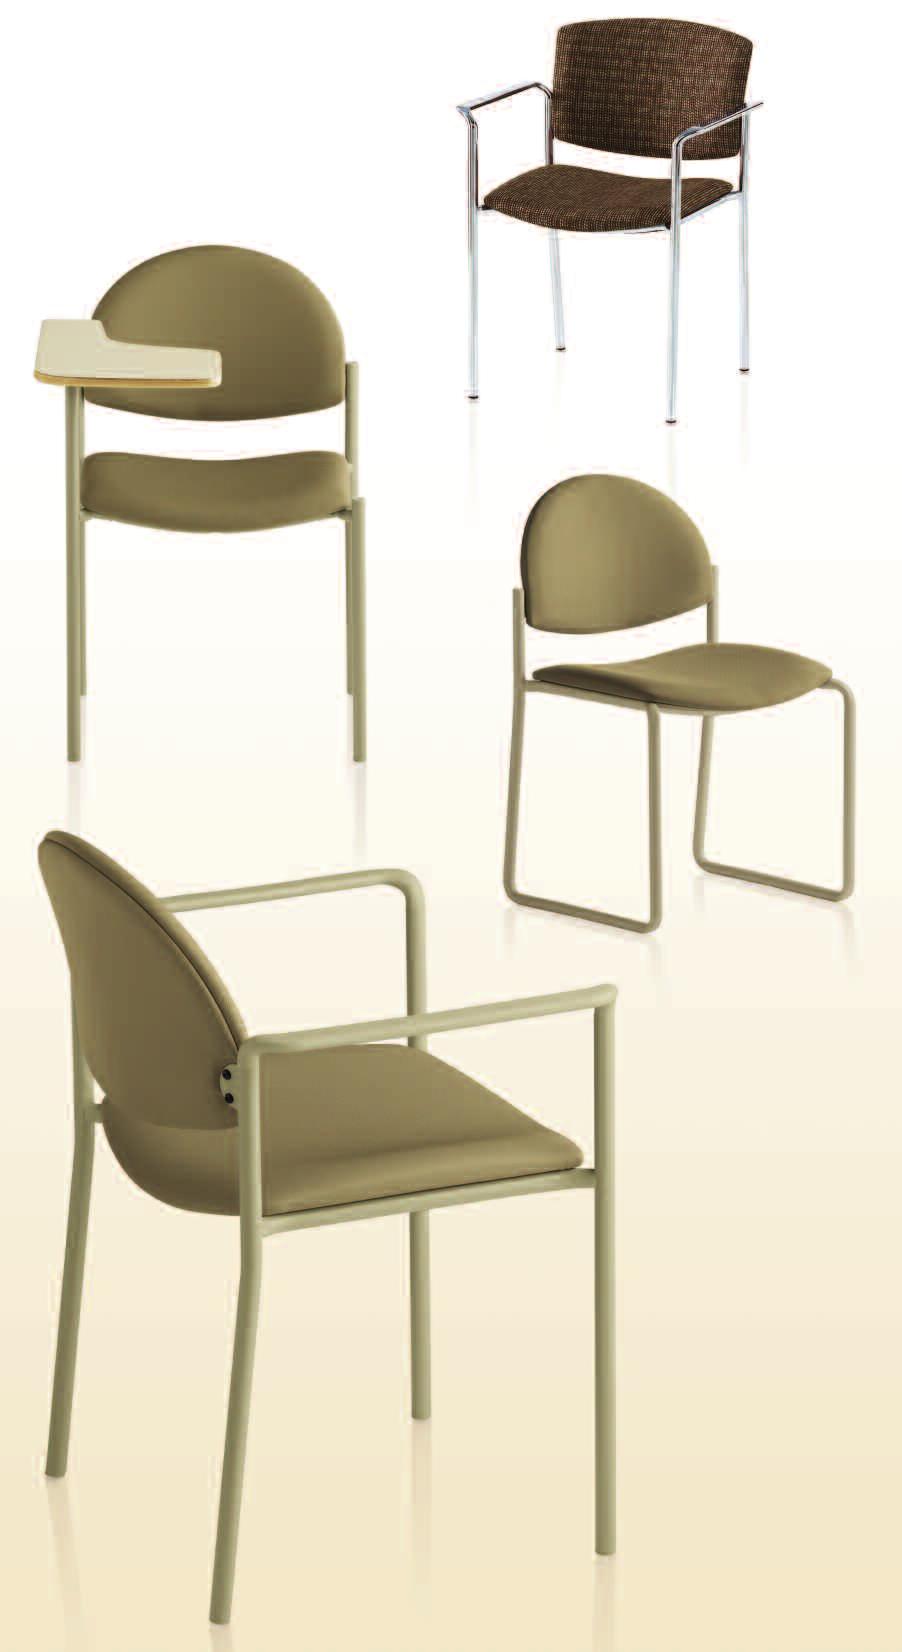 What makes Versa one of KI s most popular chairs? Versa offers big comfort in a small-scale chair. Its clean lines work well in any environment. While it s modestly priced, don t let that fool you.